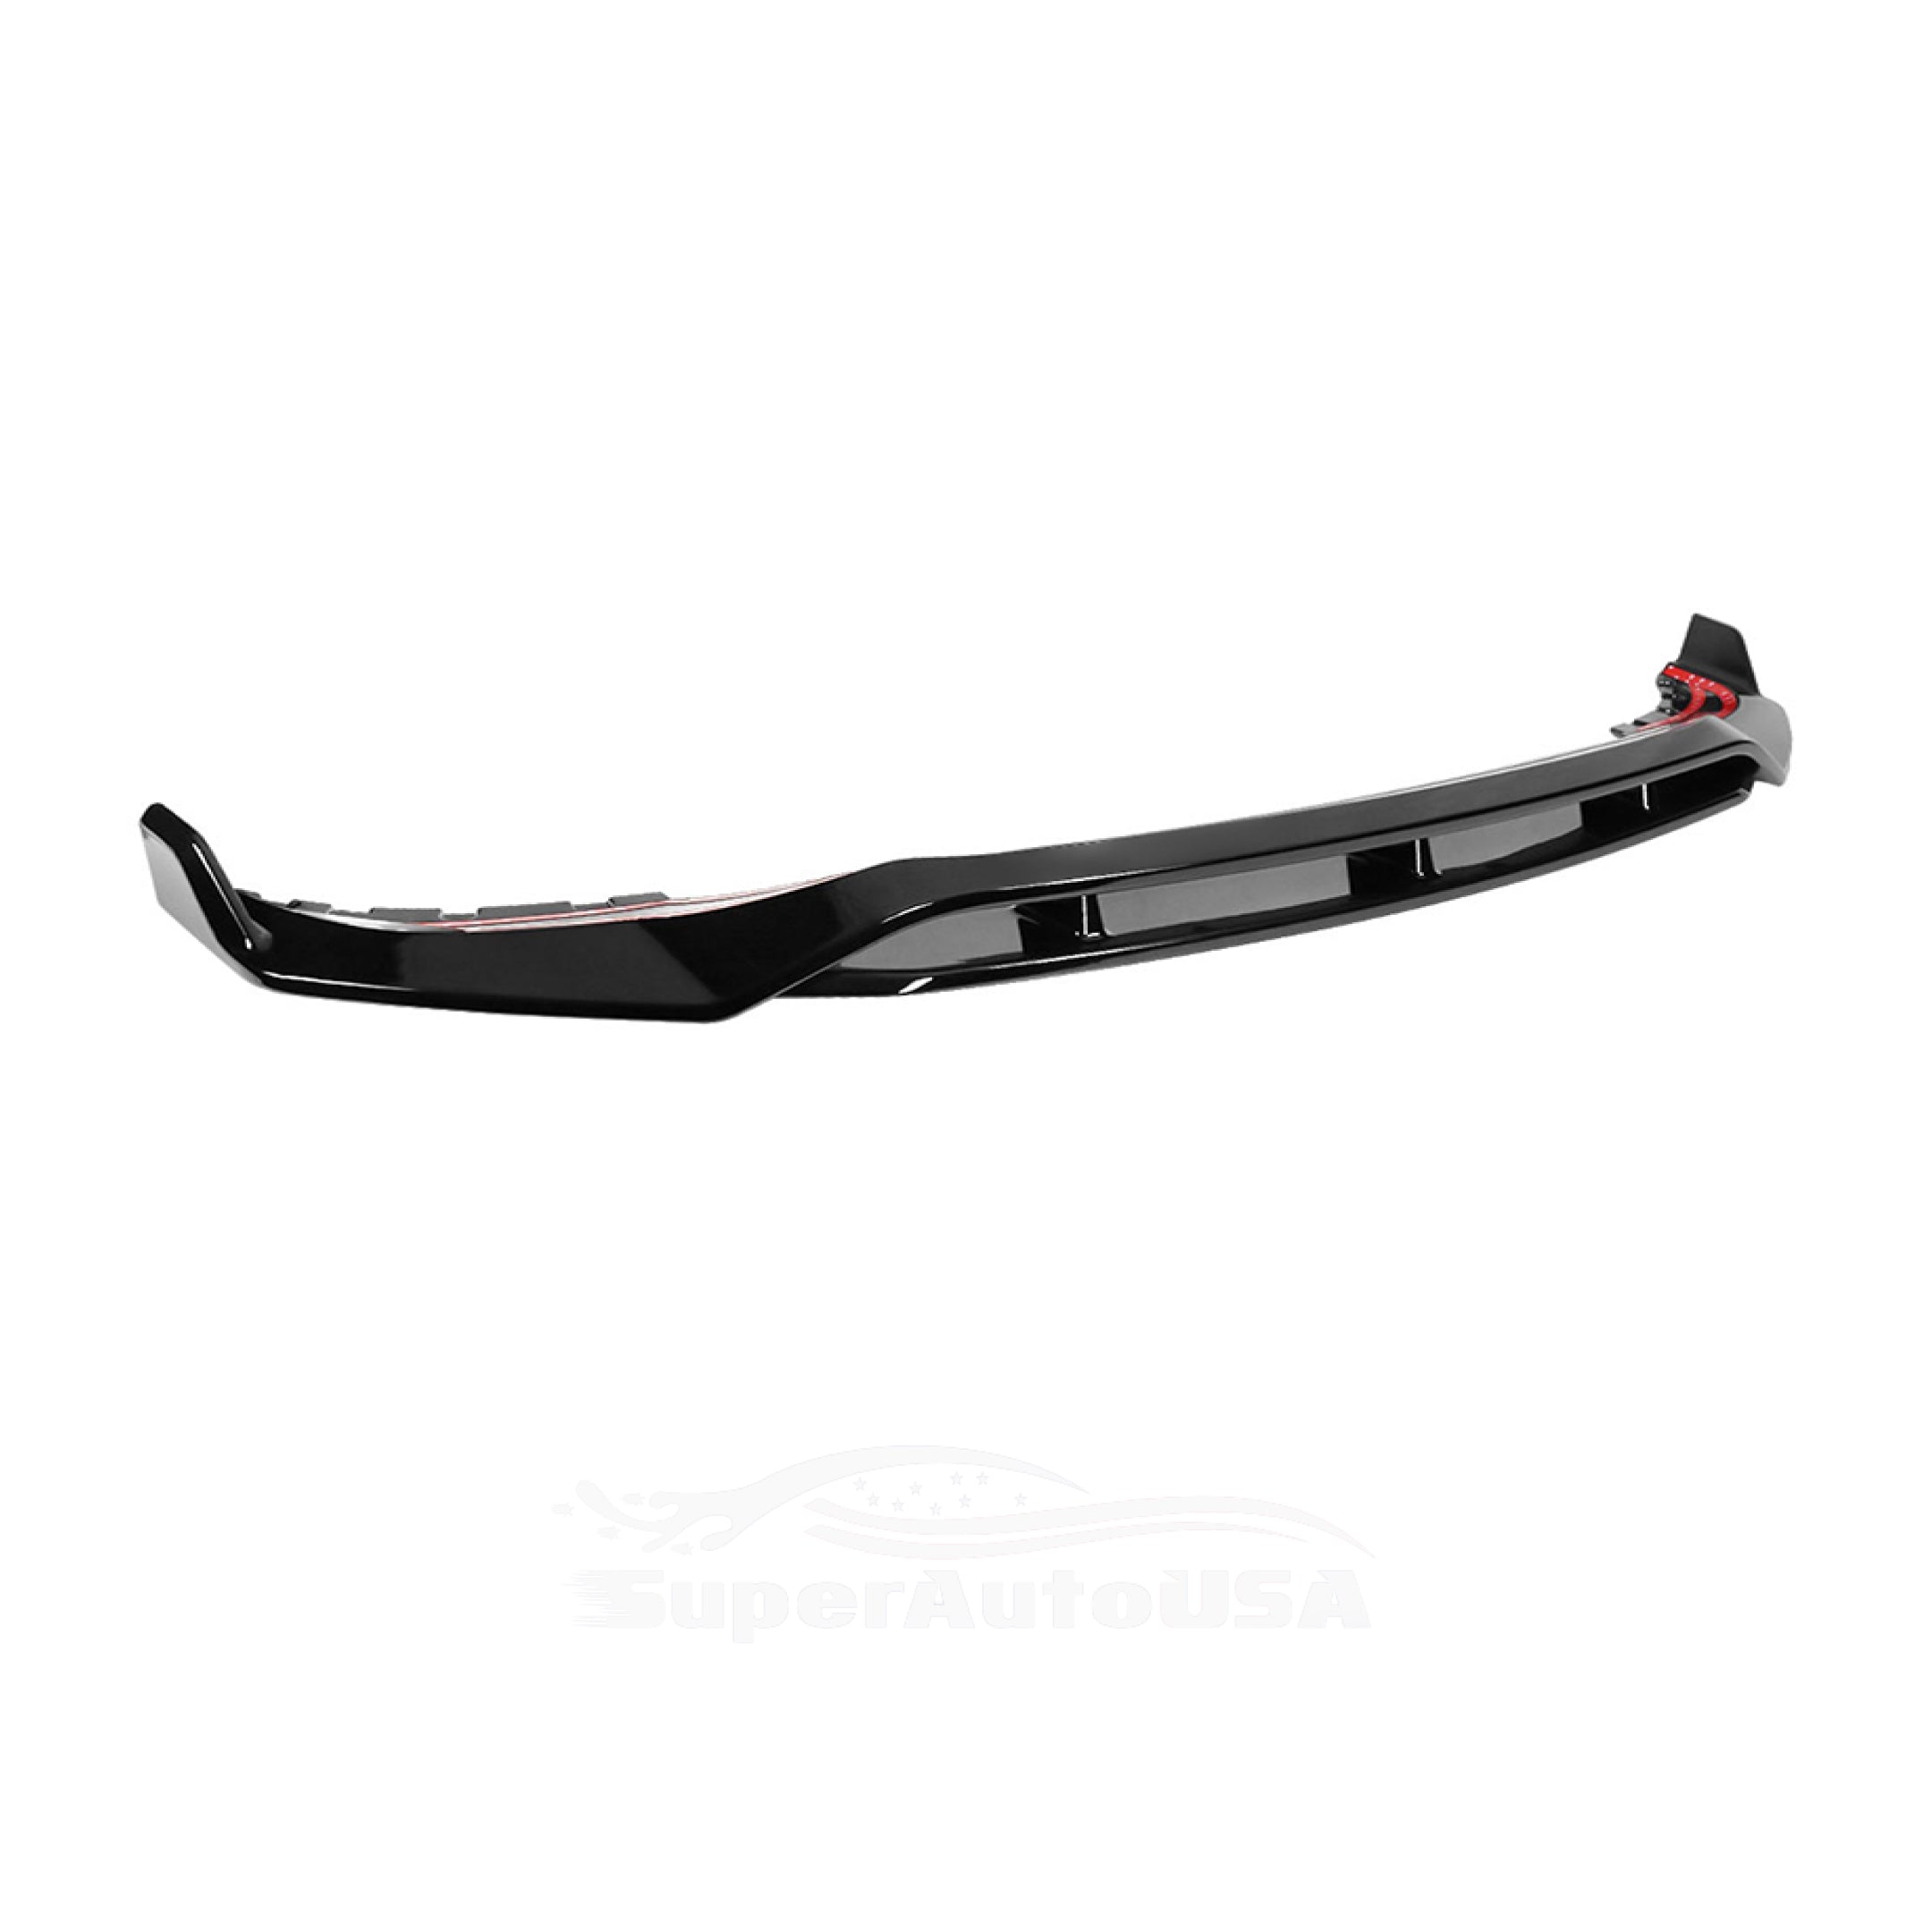 Fits 2019-2022 BMW G05 X5 with M Sport Front Bumper Lip Spoiler (Gloss Black)